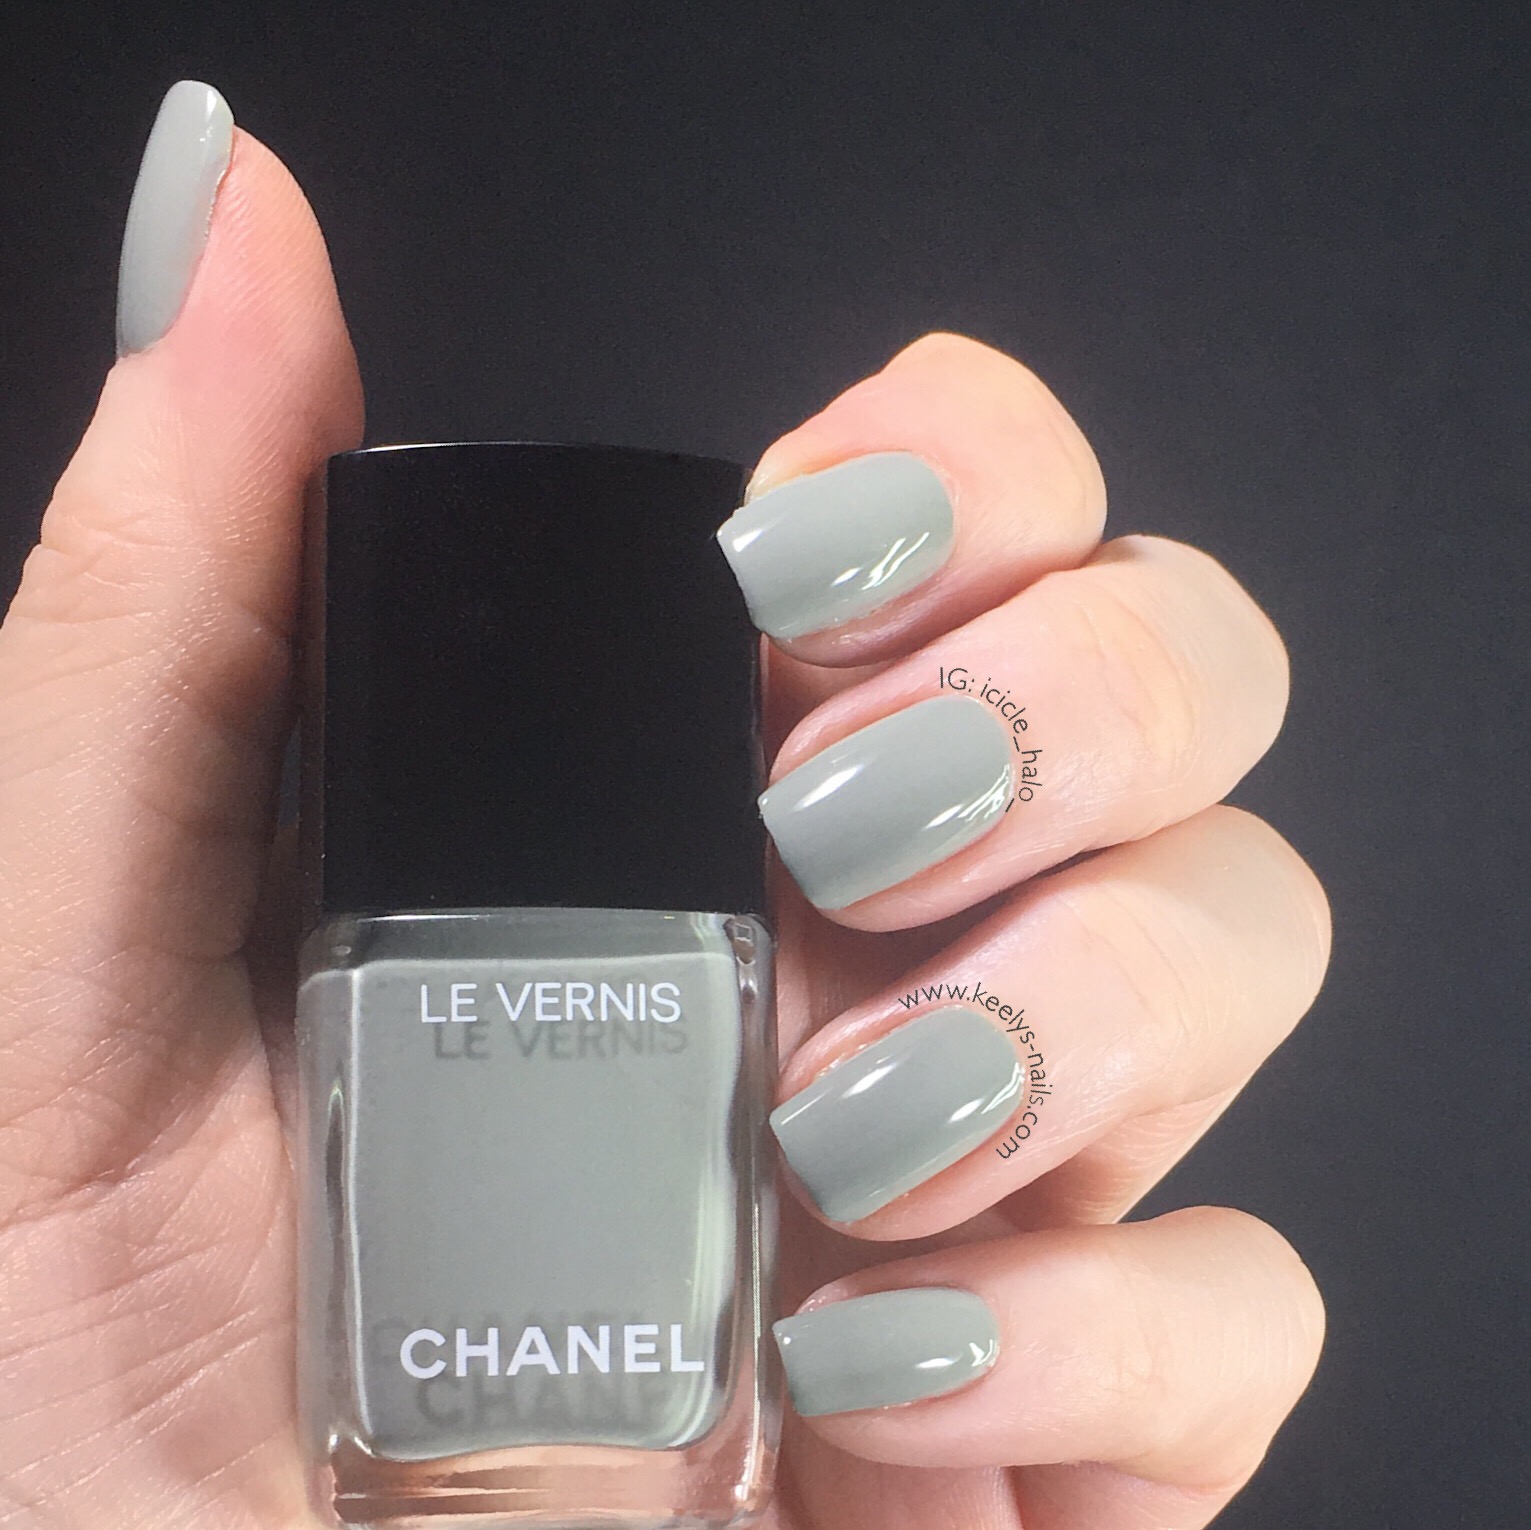 Chanel Fall Winter 2017 Horizon Line swatched by Nails - Keely's Nails